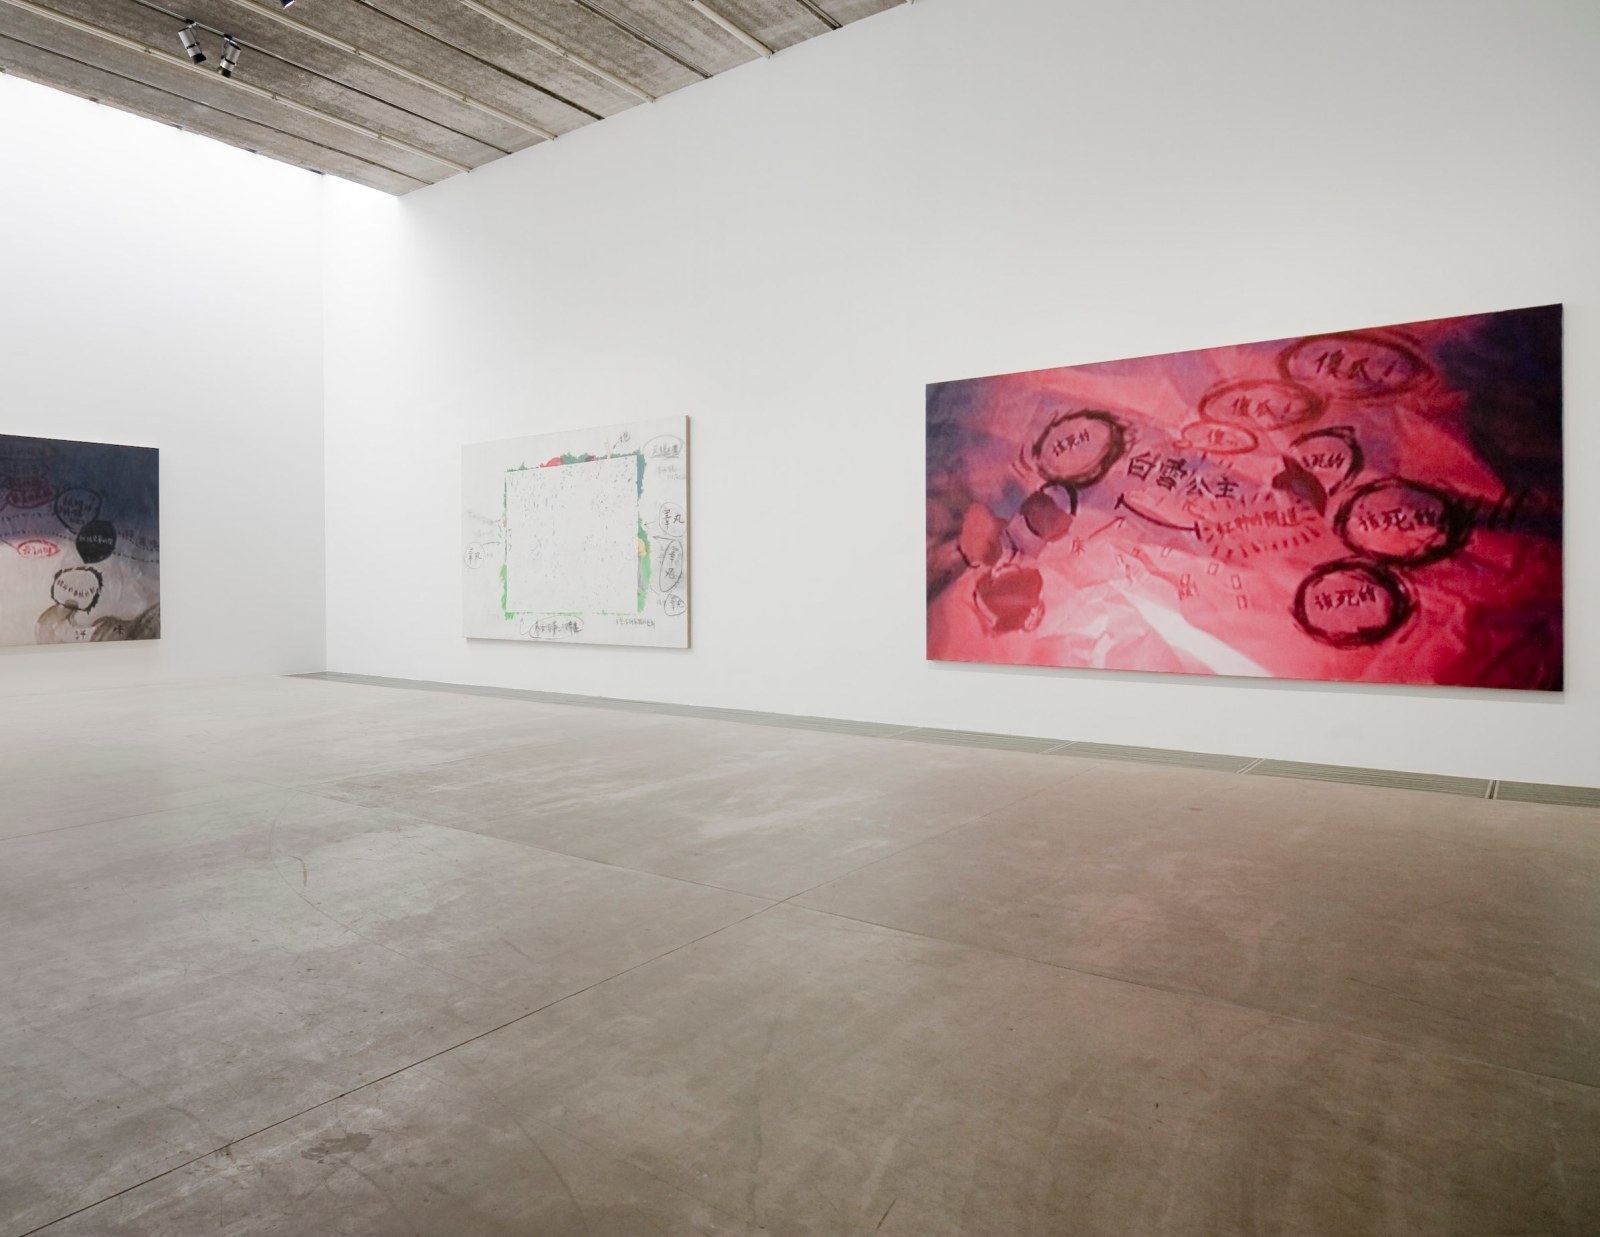 Installation view, Stepfather Has an Idea, Galerie Urs Meile, Beijing, China, 2010